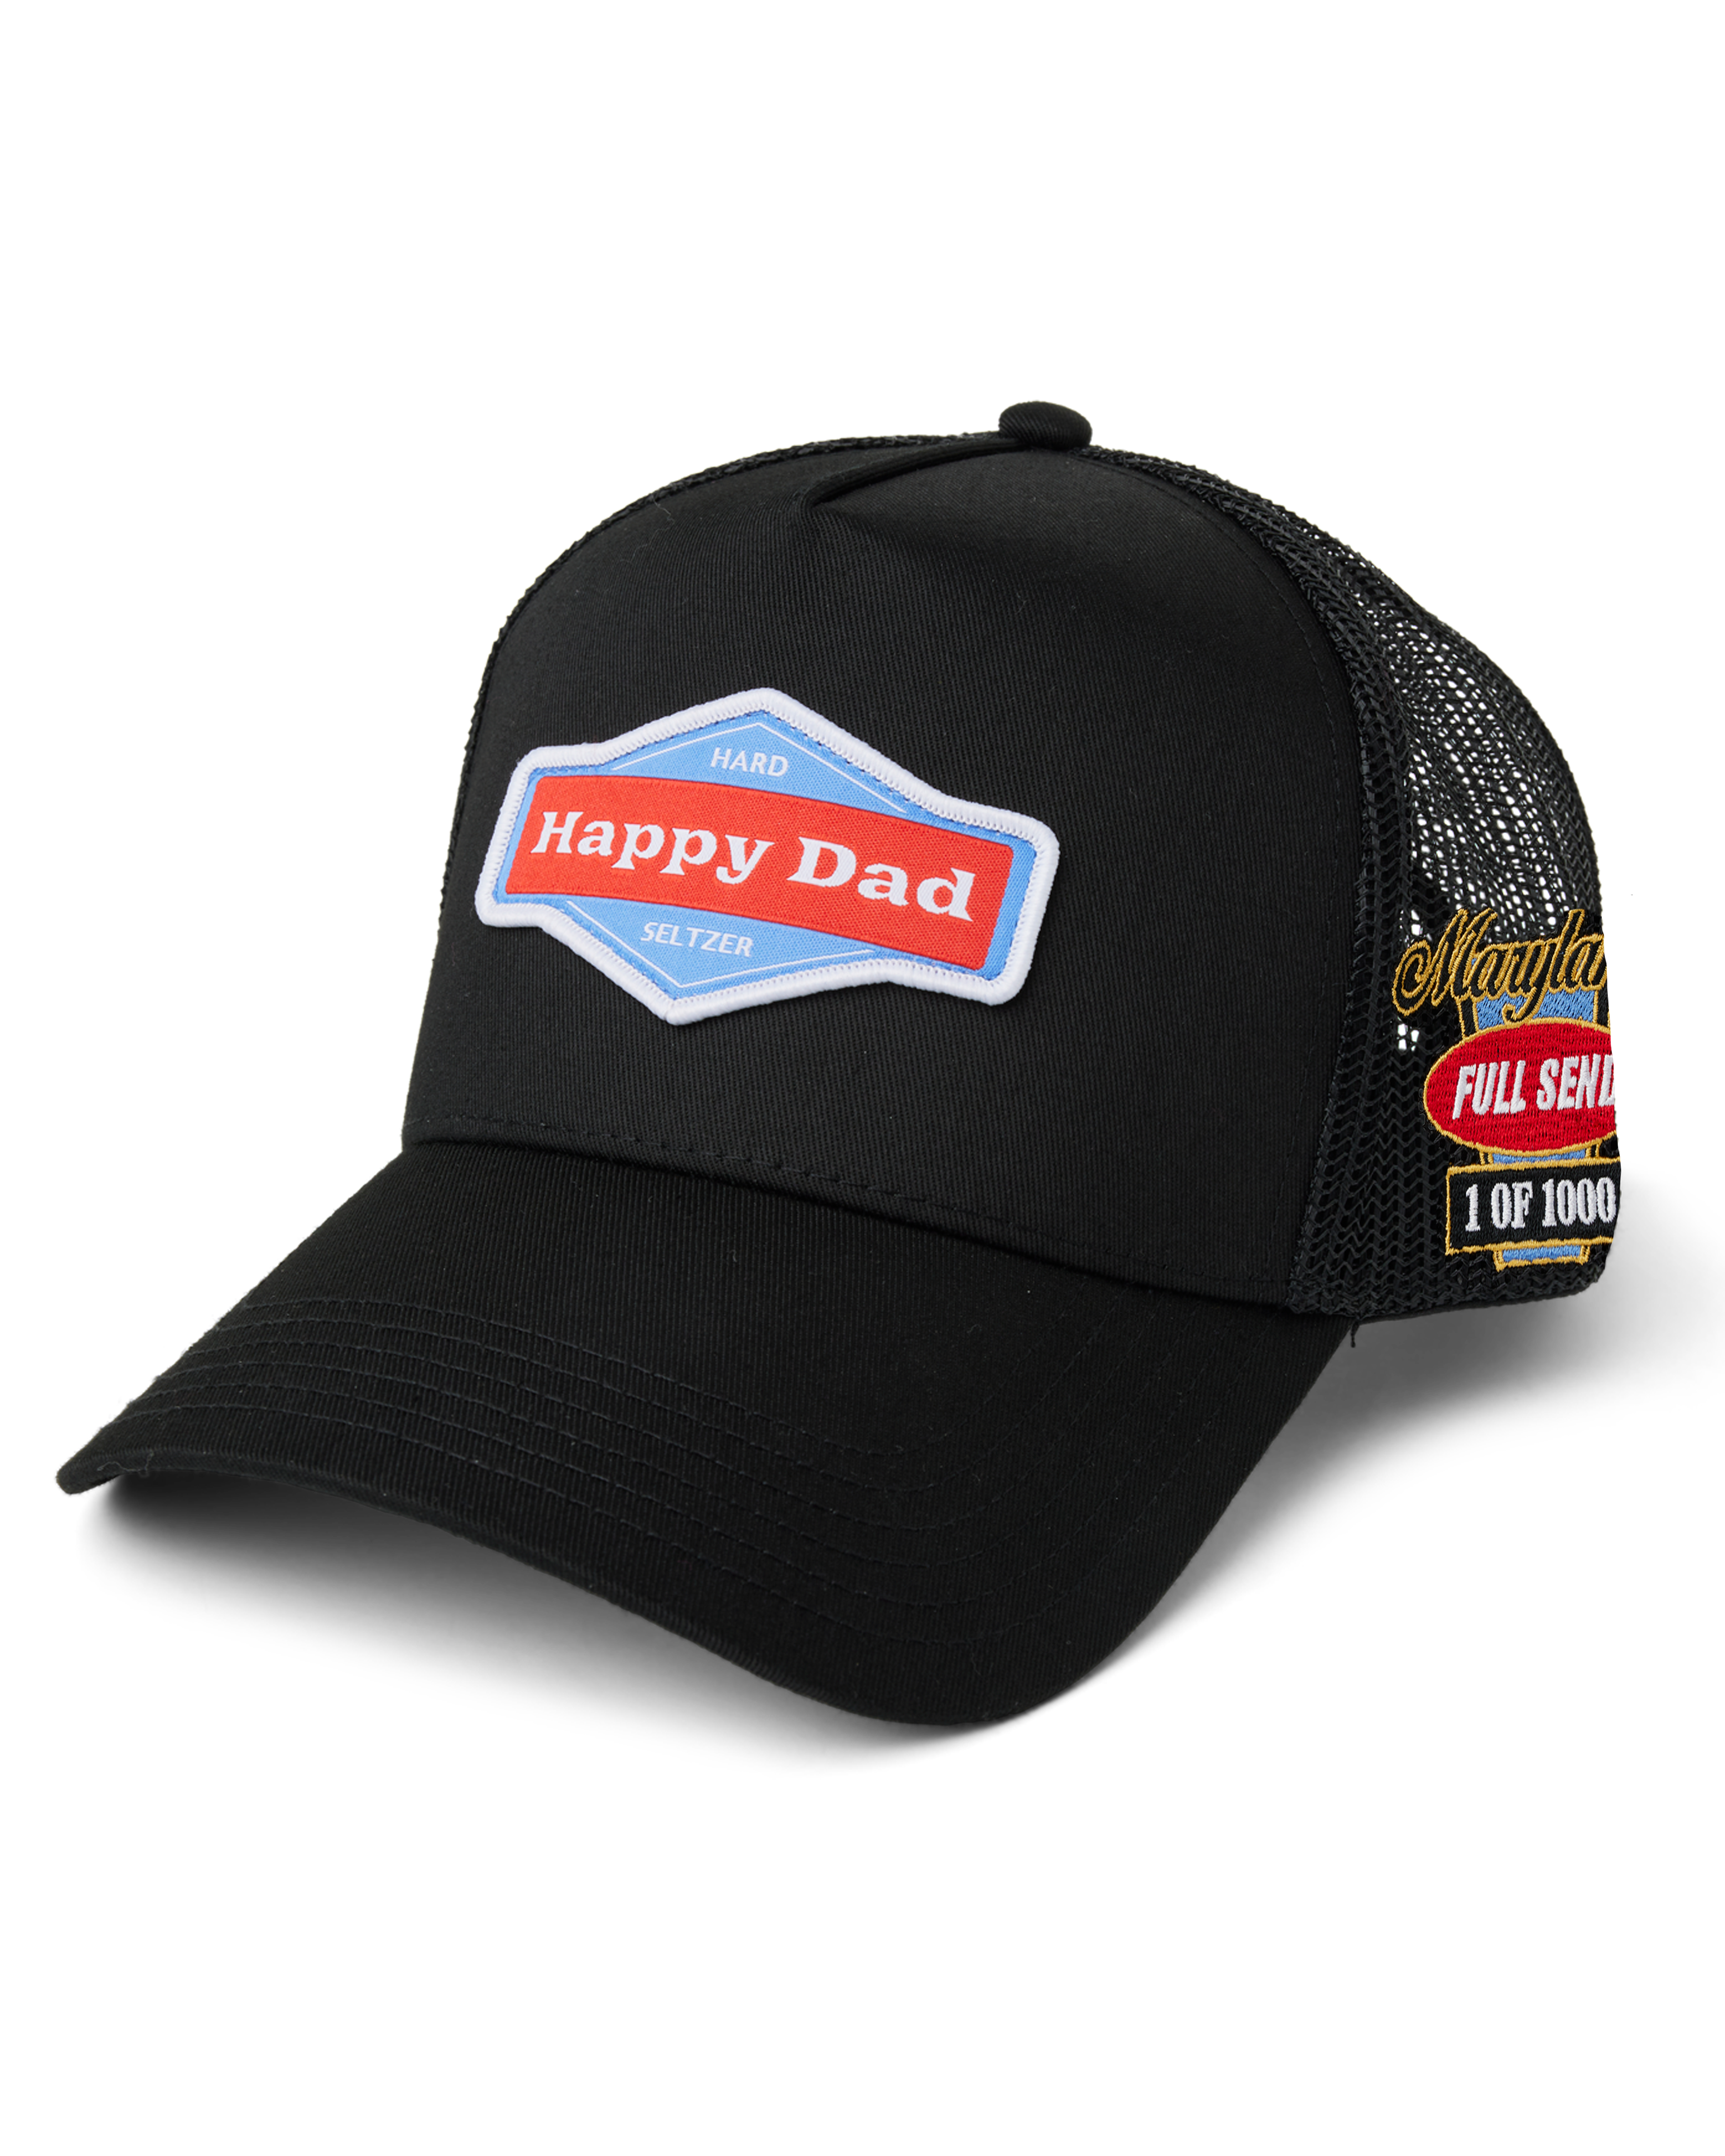 (Limited) Maryland - Happy Dad State Trucker Hat 1 of 1000